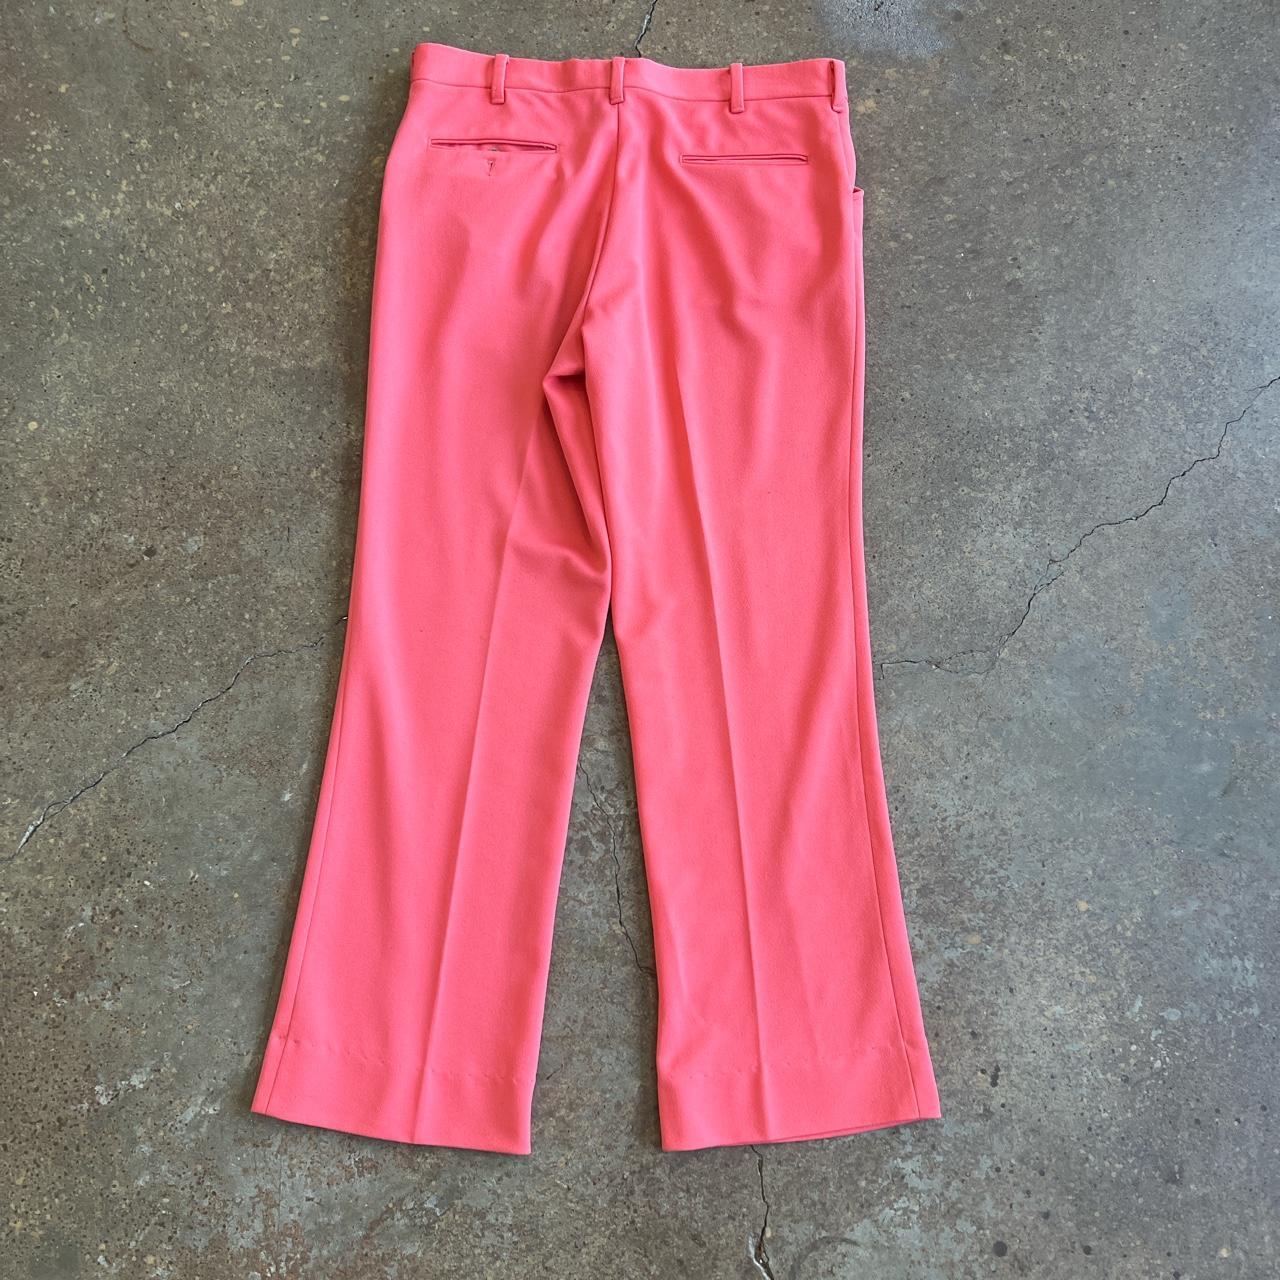 Vintage 1970s salmon pink polyester pants , Casual